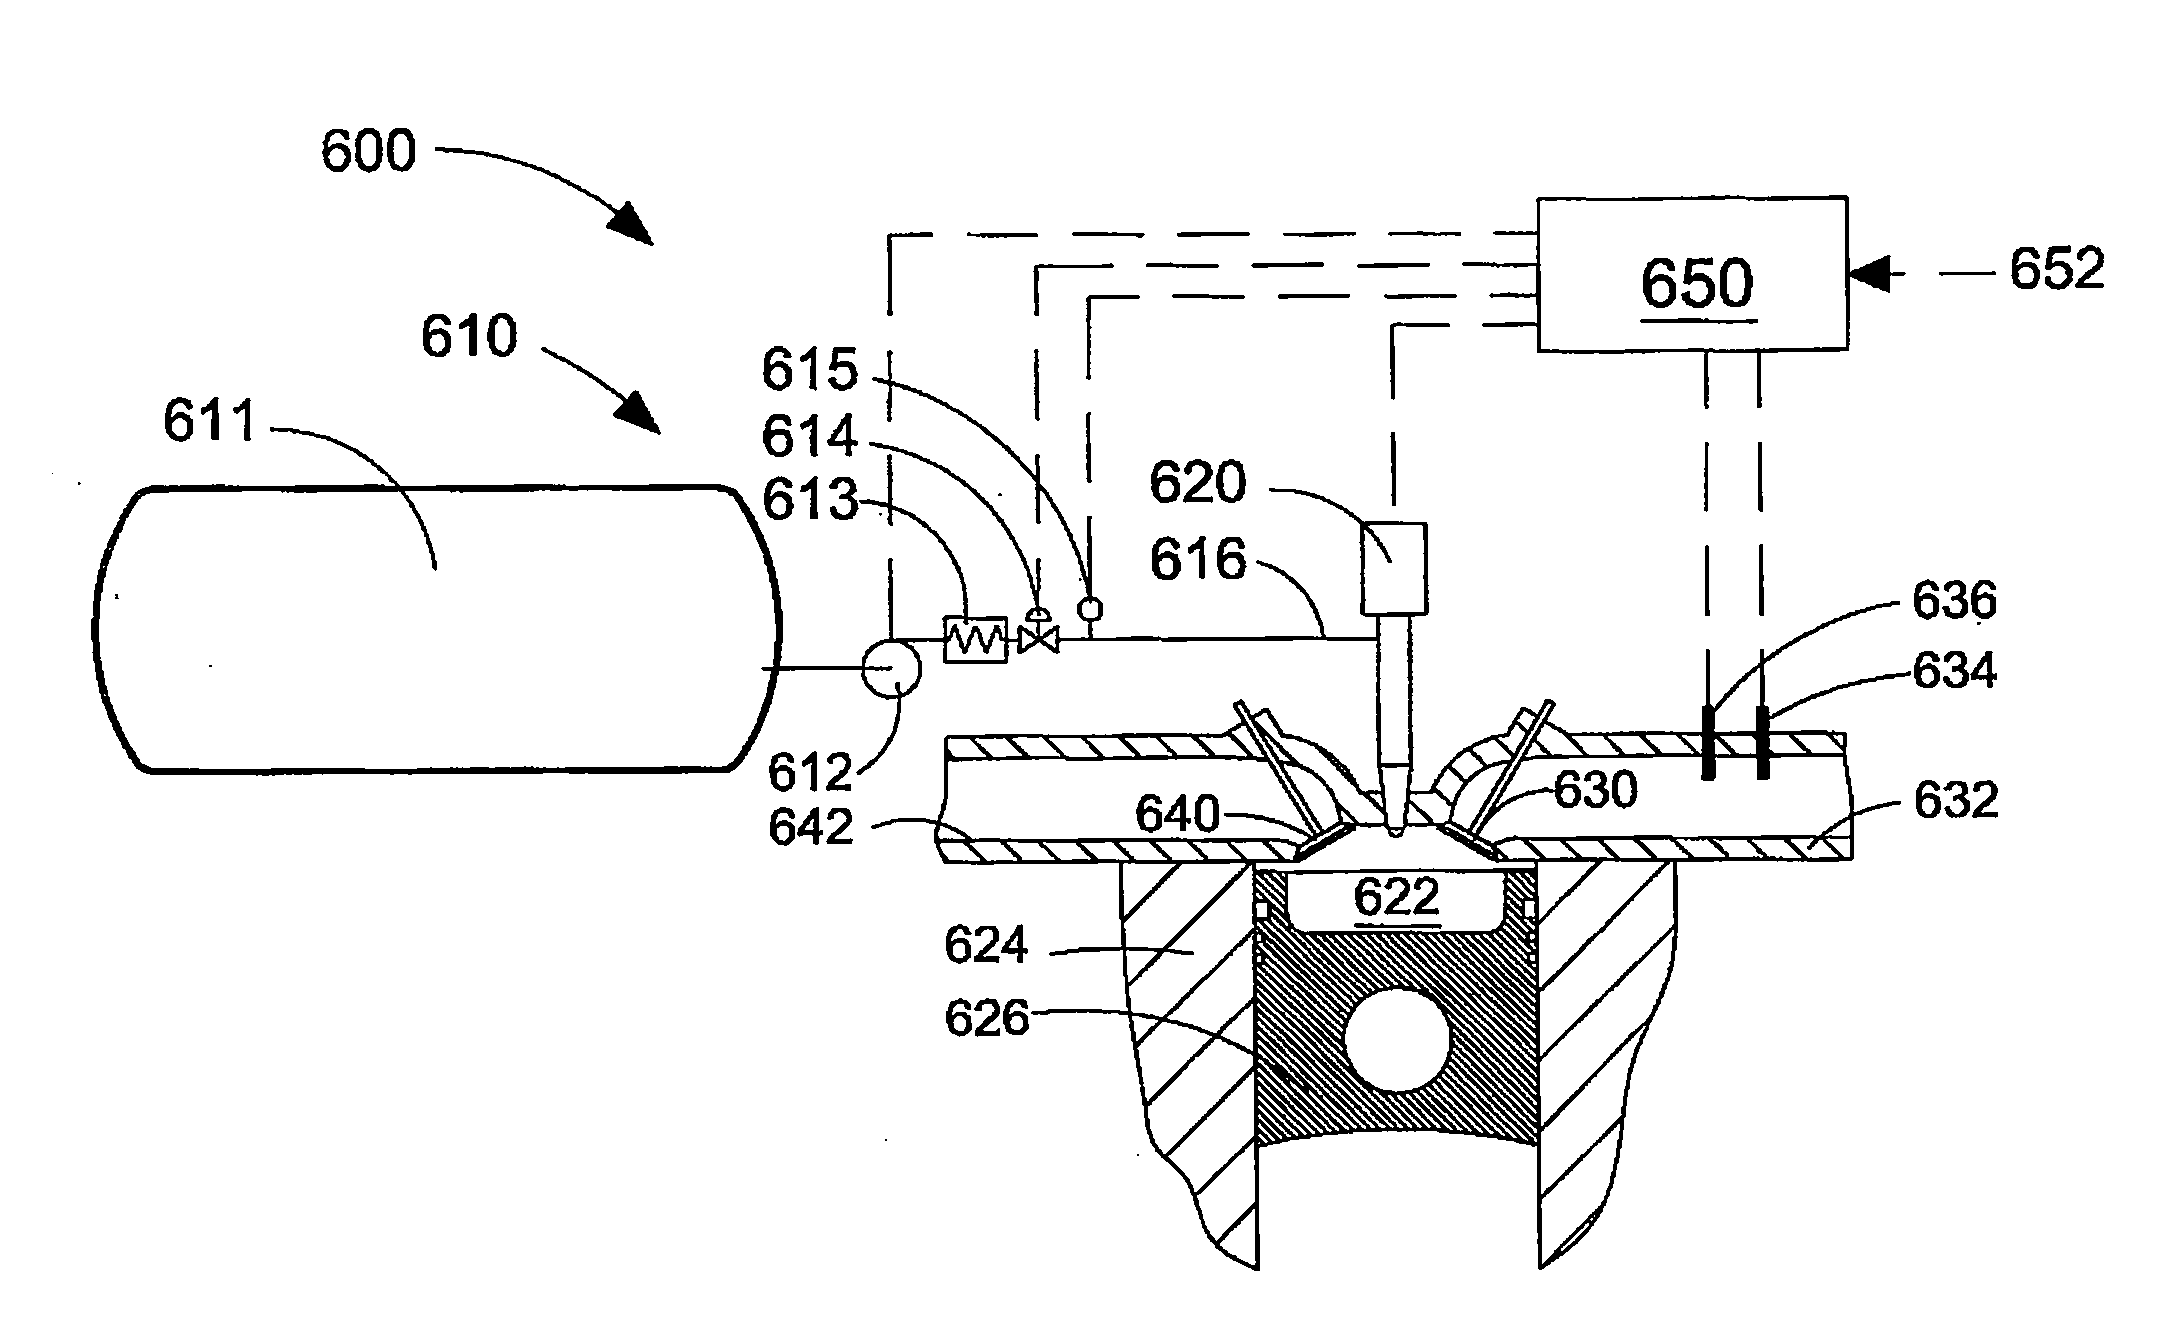 Method Of Accurately Metering A Gaseous Fuel That Is Injected Directly Into A Combustion Chamber Of An Internal Combustion Engine